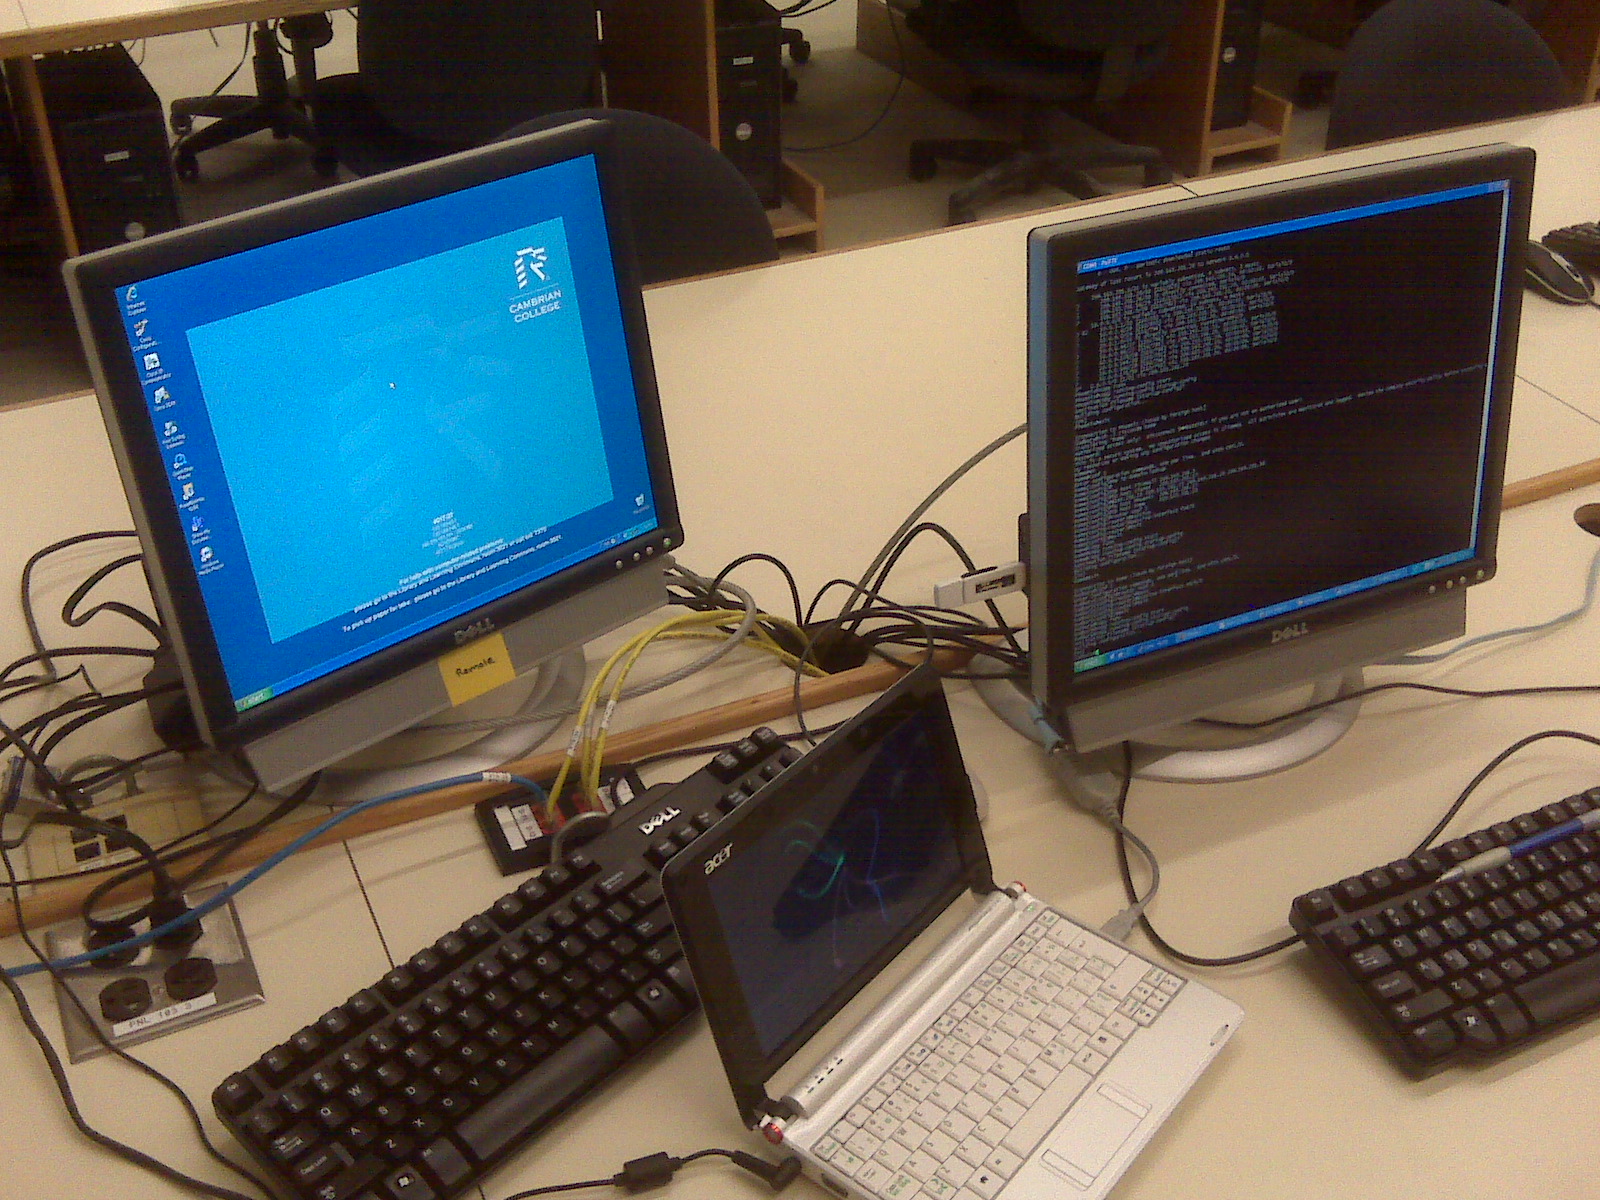 I had to include a picture of my Acer Aspire A110L netbook (running Gentoo of course).